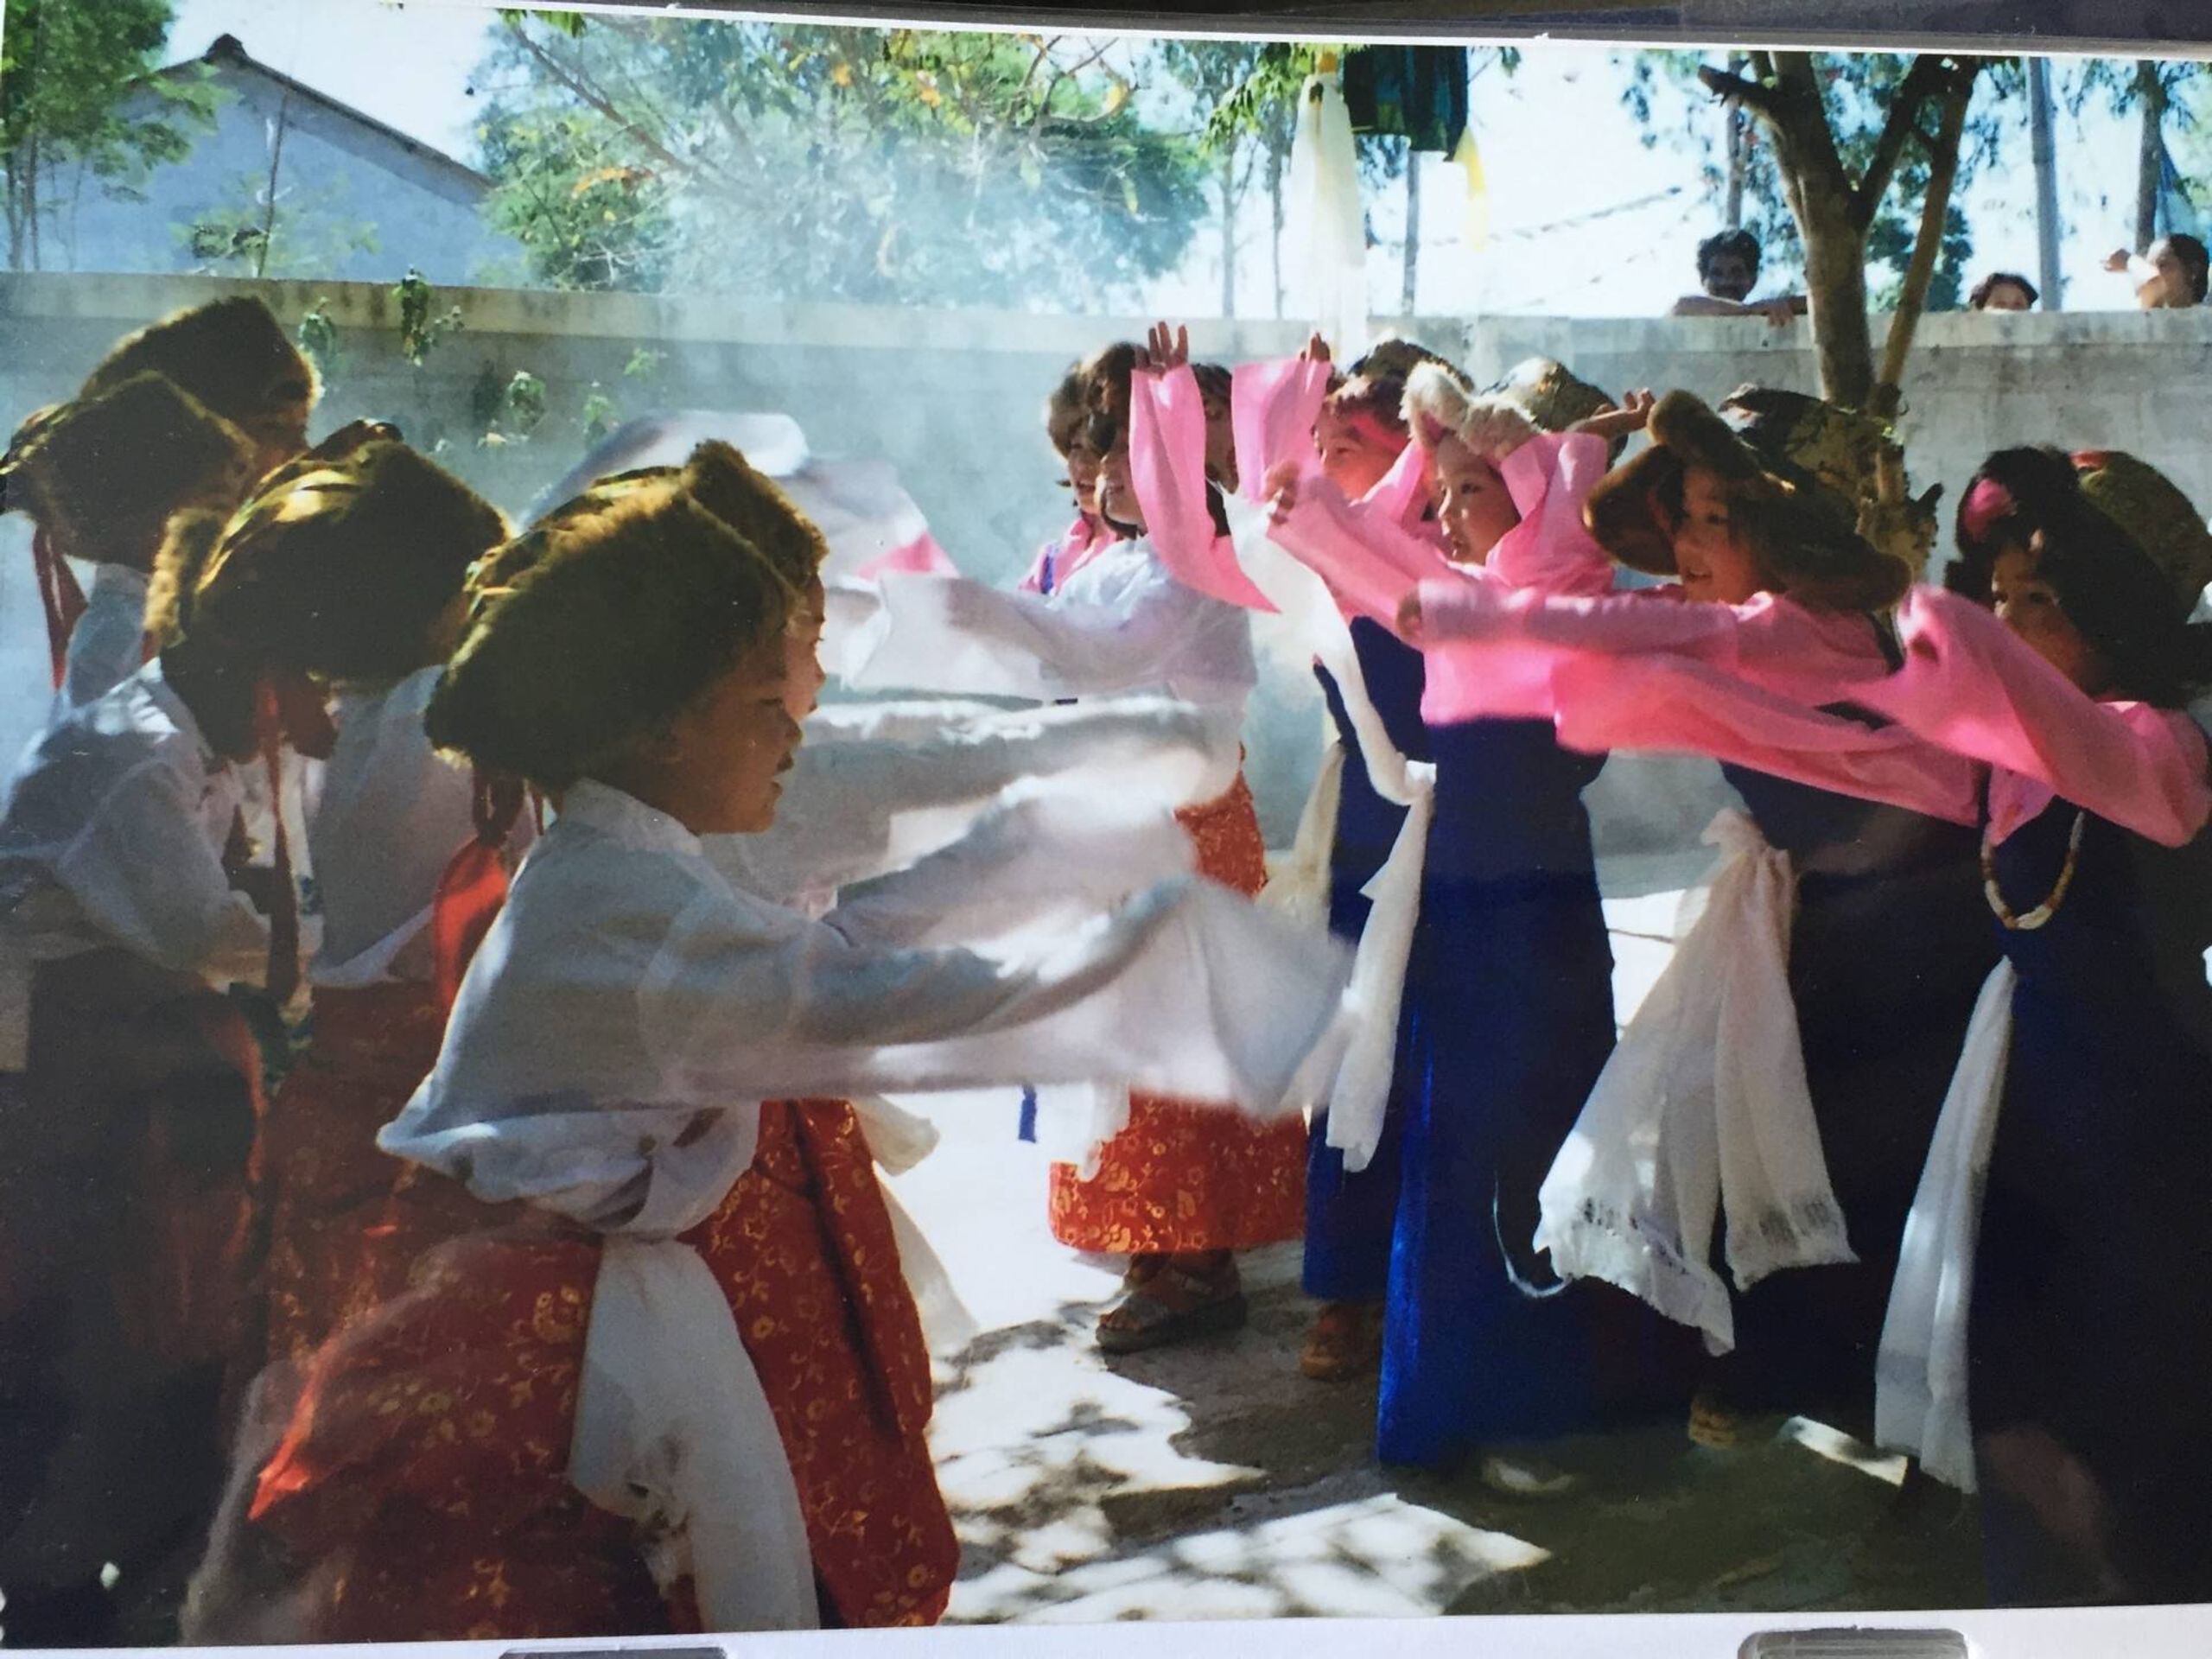 Row of children dressed in traditional Tibetan clothing dancing